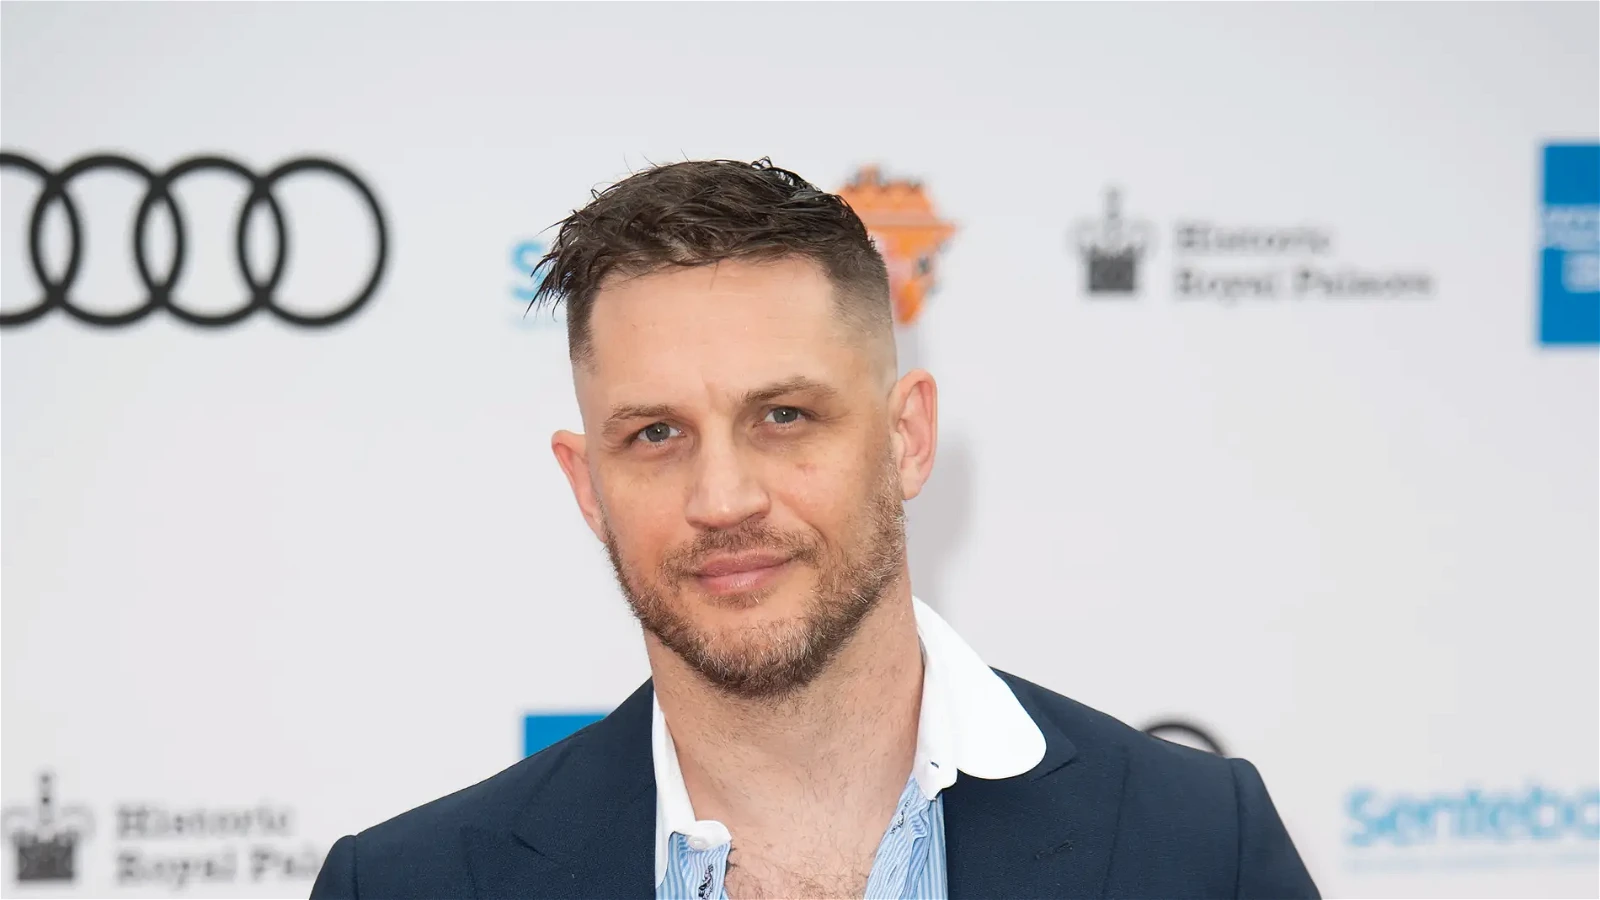 Tom Hardy had a very troubled past